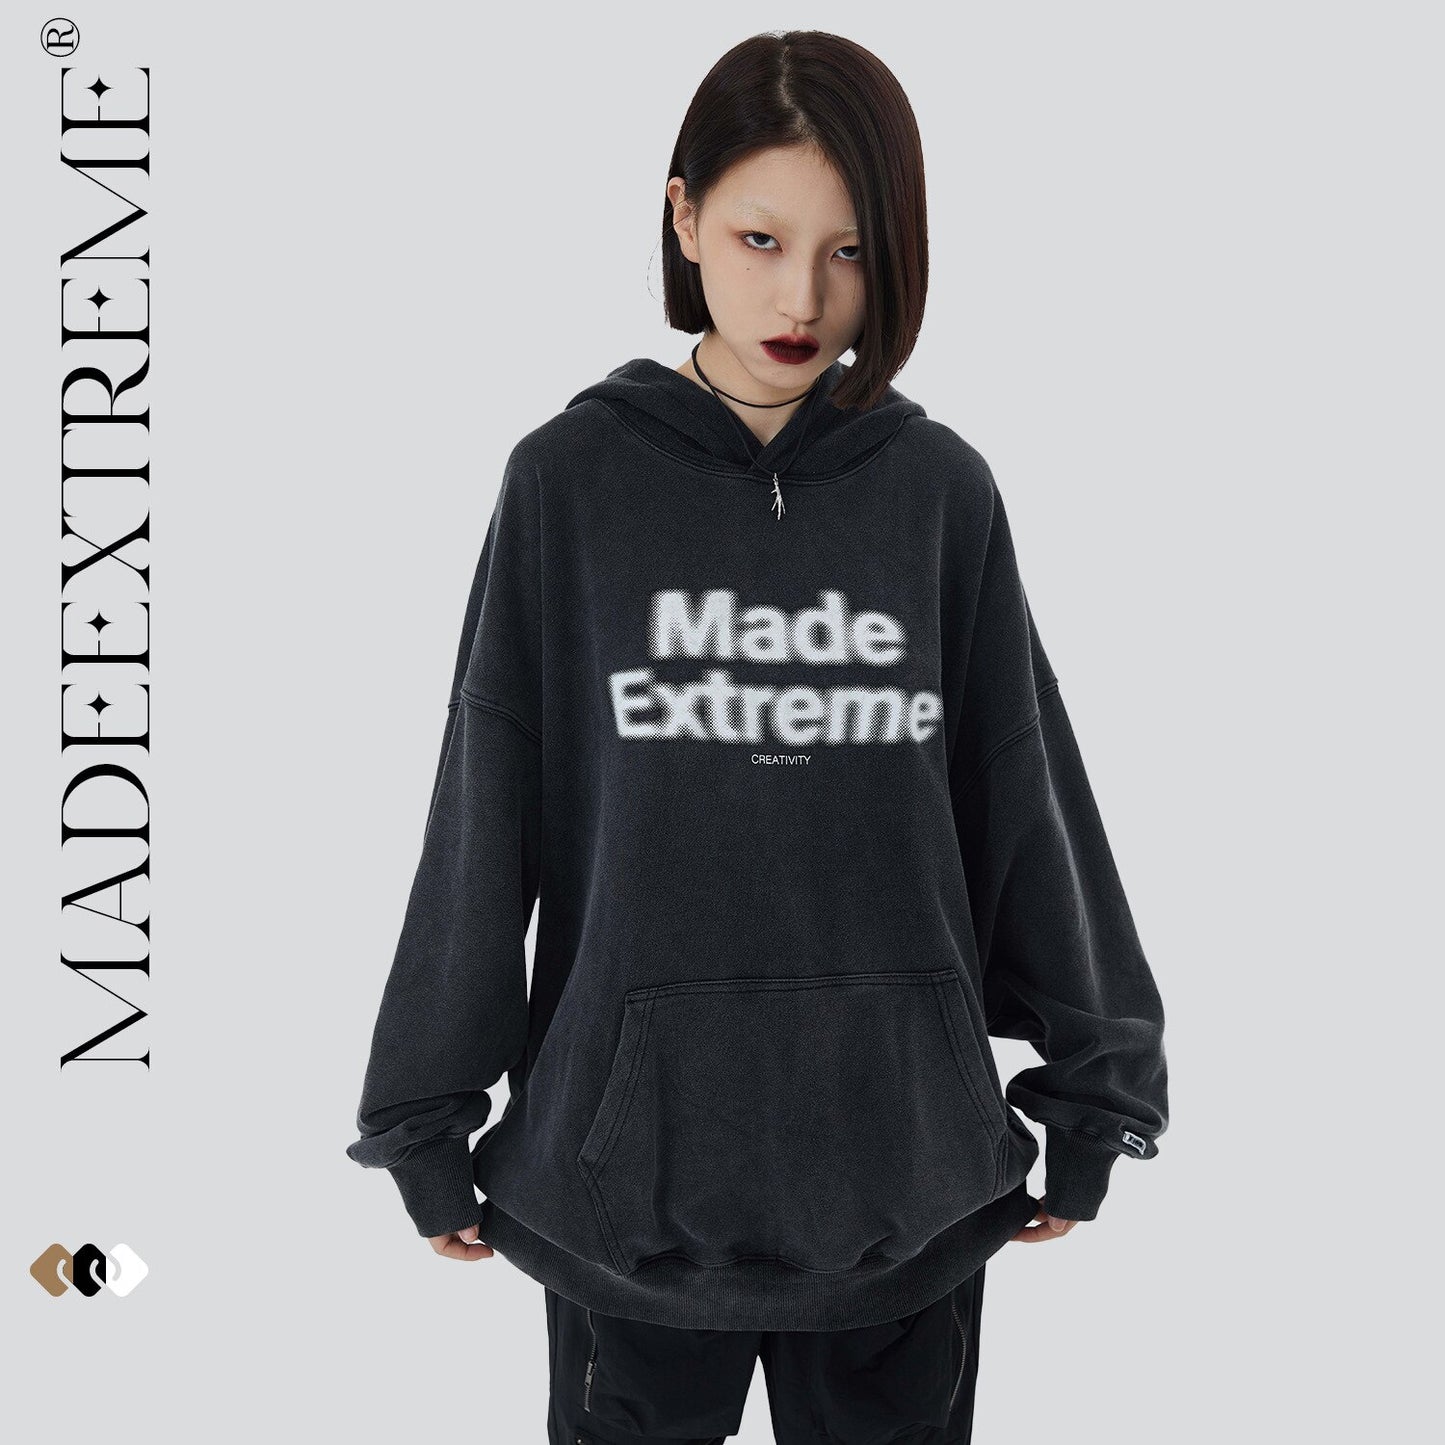 MADE EXTREME Hoodie